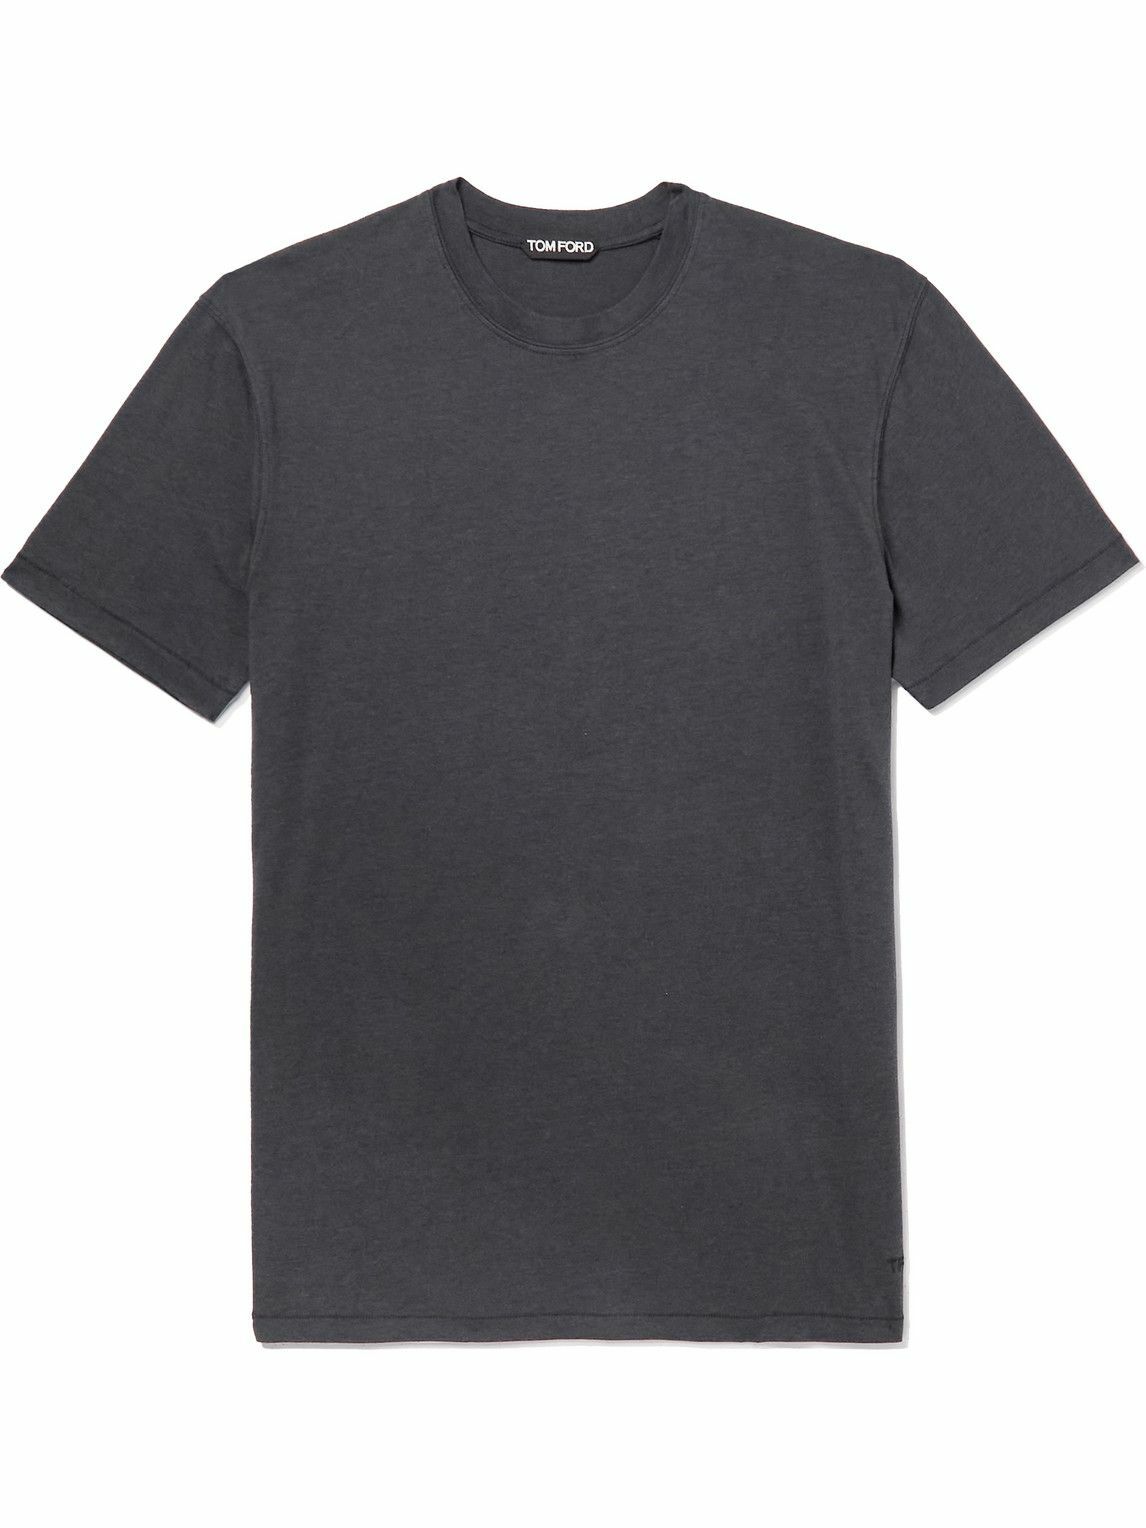 TOM FORD - Lyocell and Cotton-Blend Jersey T-Shirt - Black TOM FORD